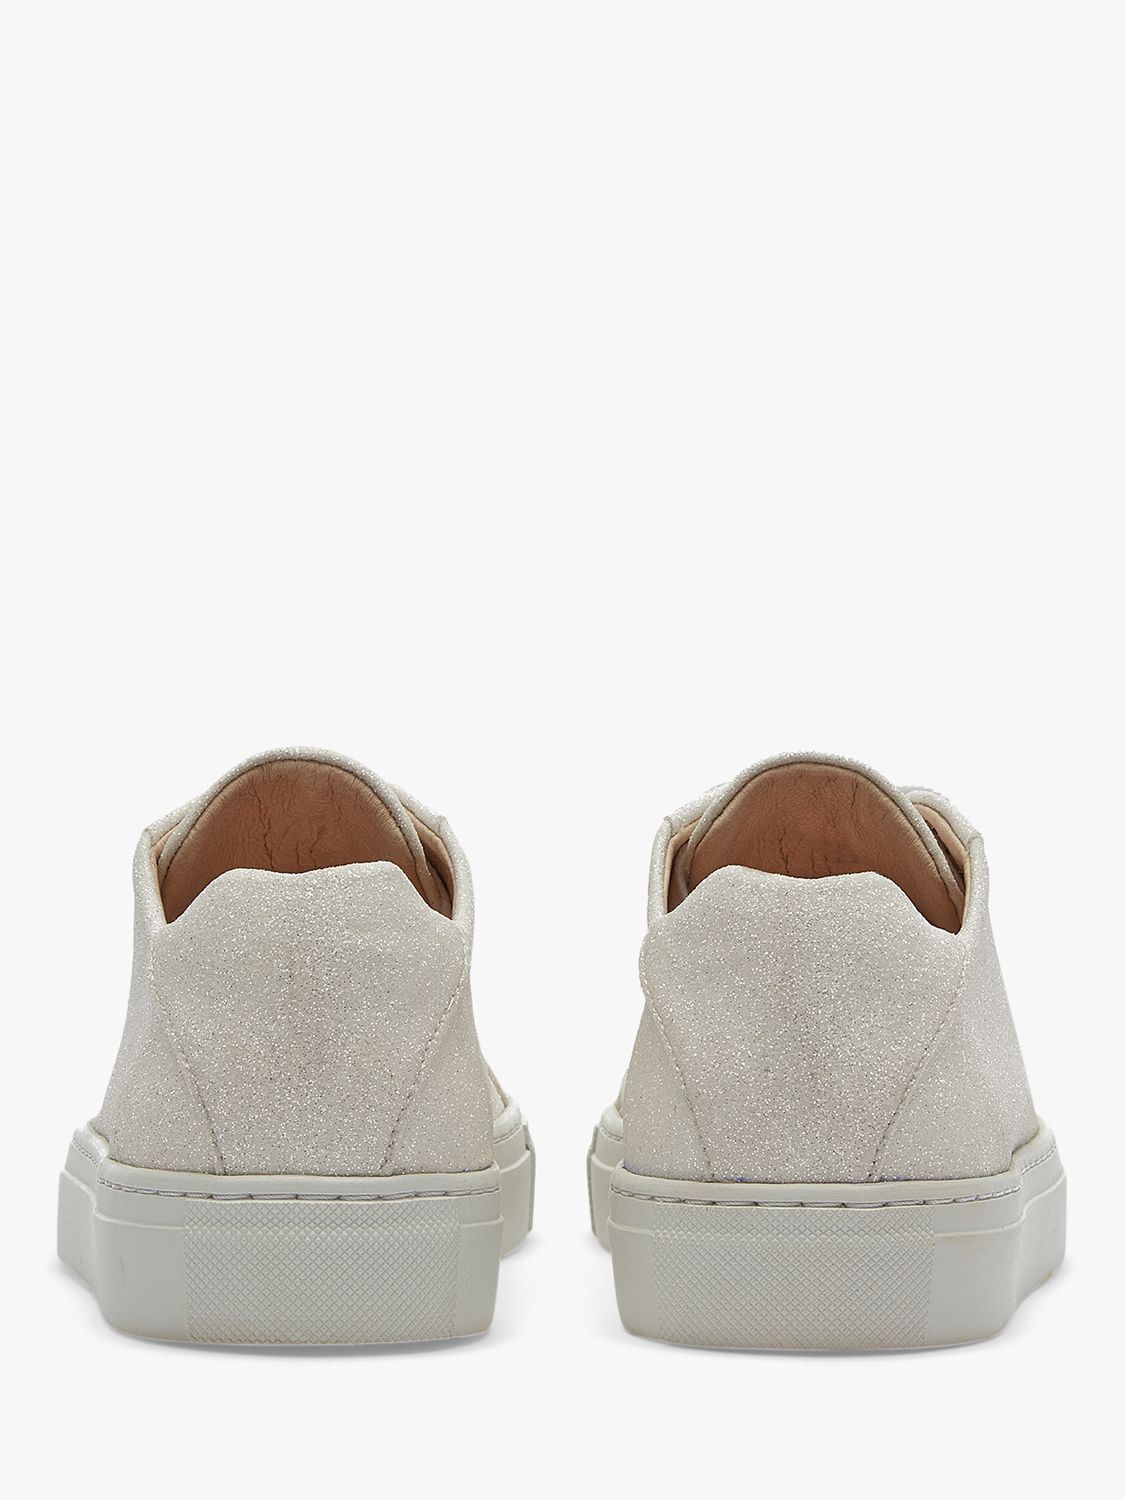 Buy Rainbow Club Millie Shimmer Wedding Trainers, Ivory Online at johnlewis.com